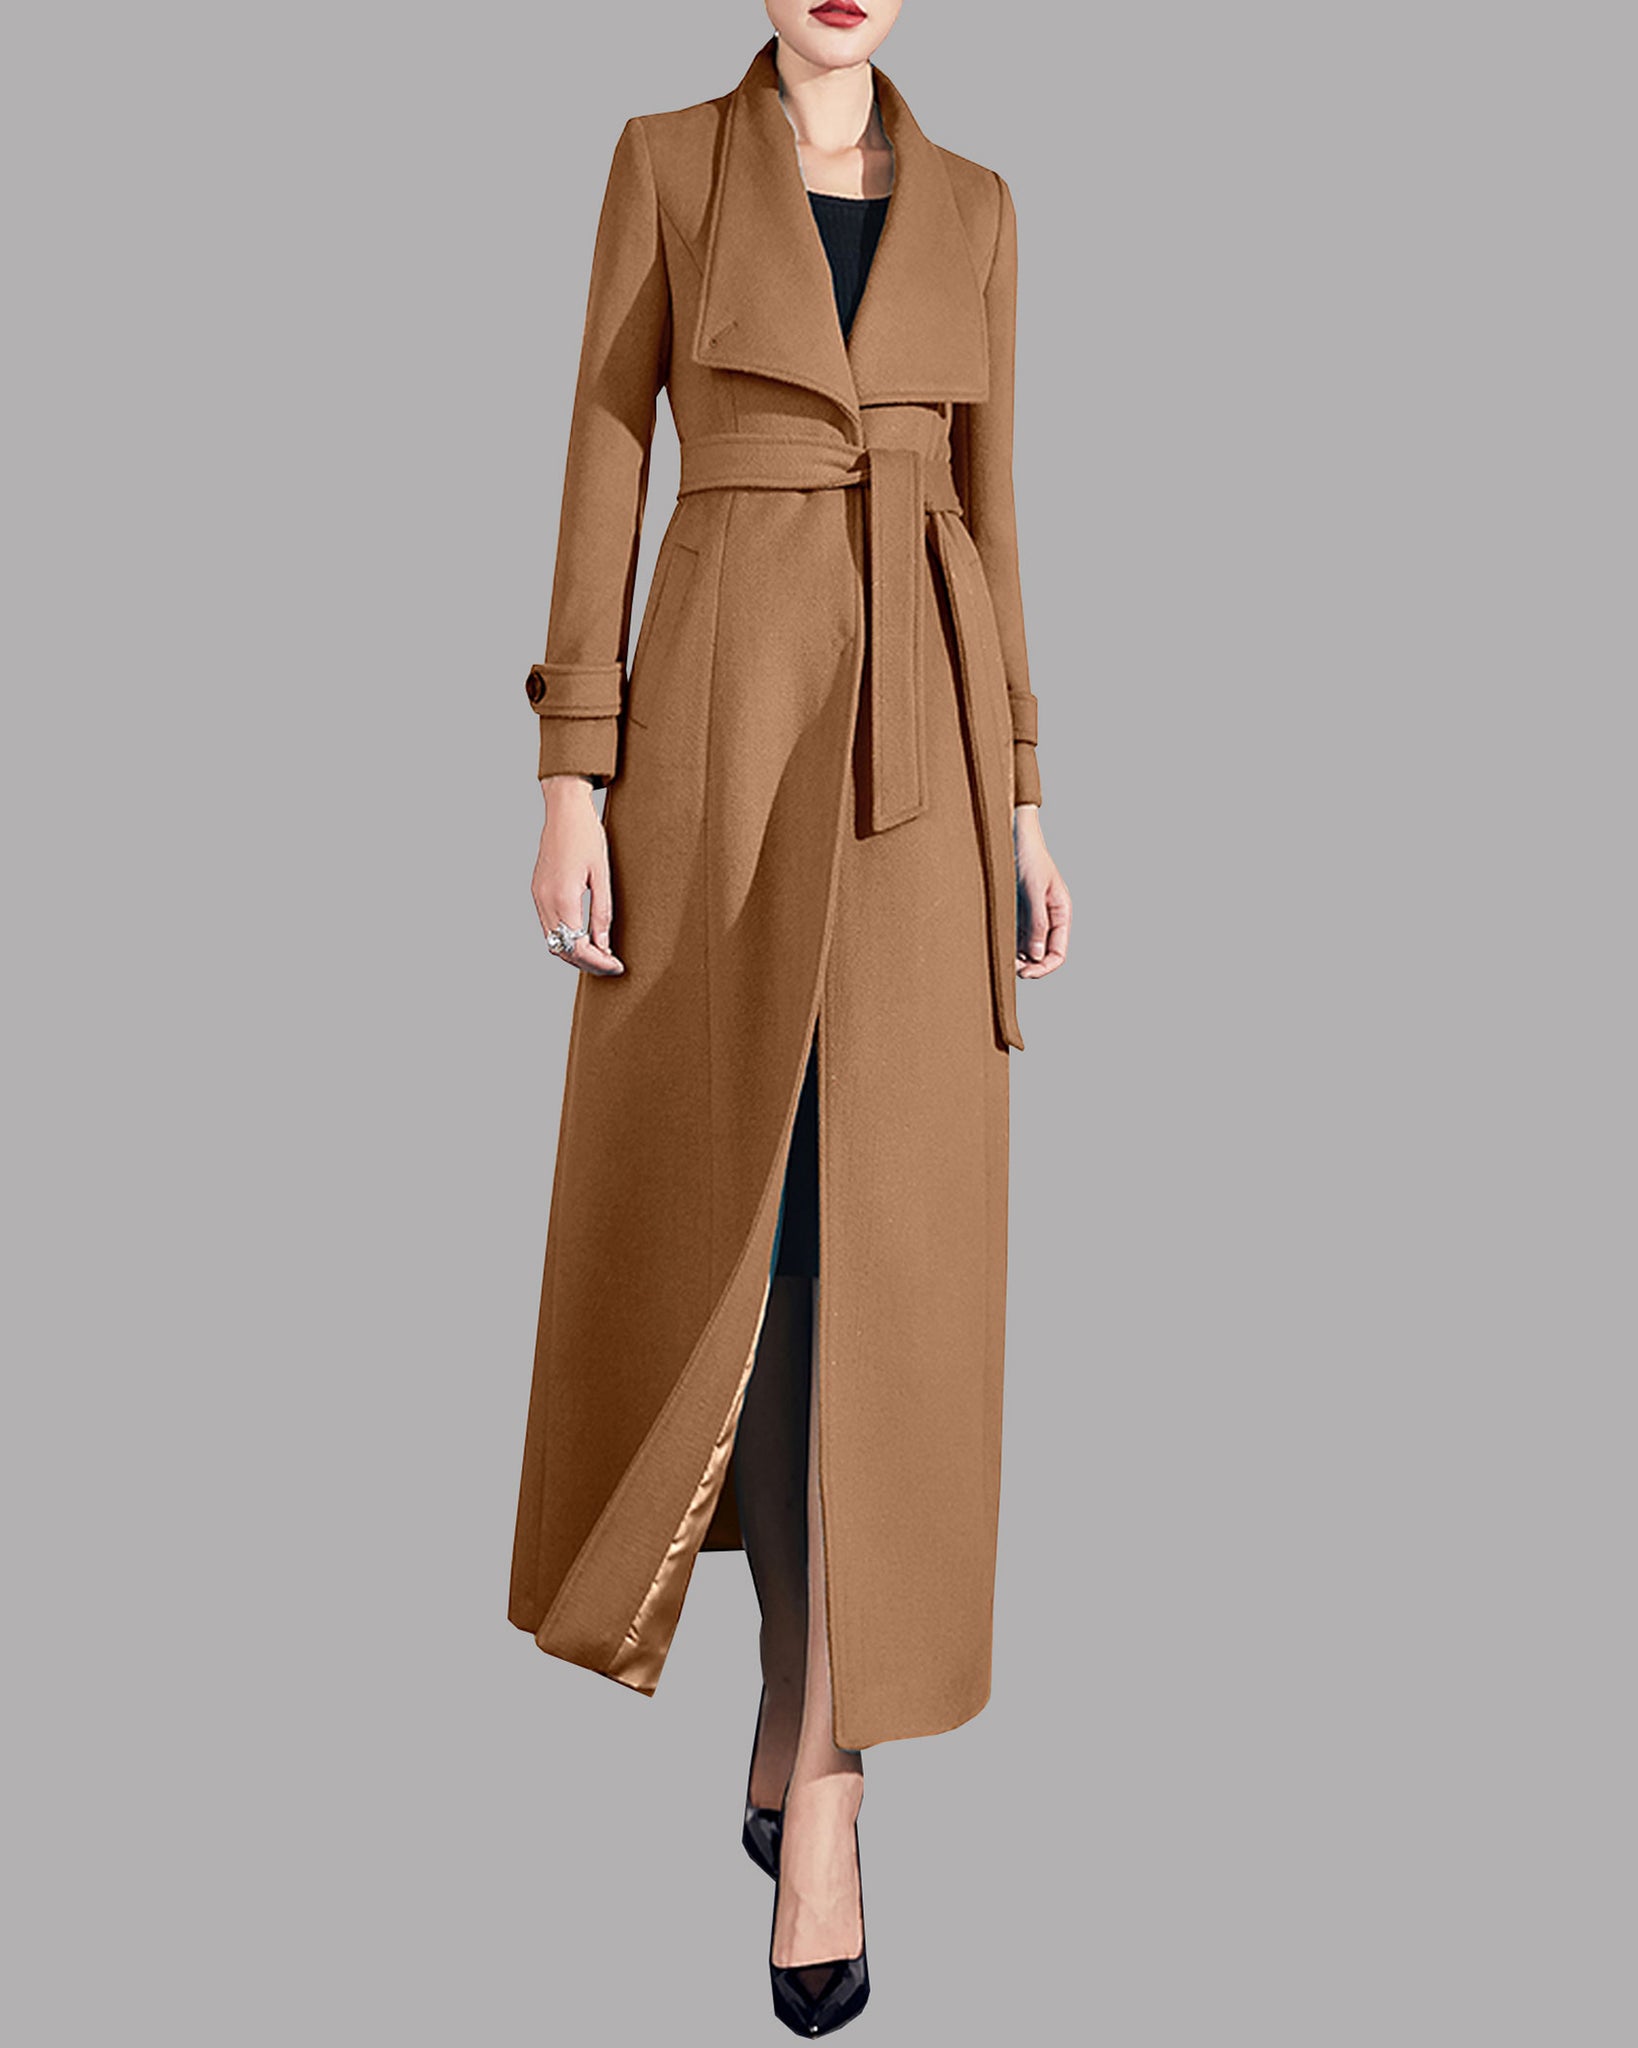 Elegant Coat and Dress with Guipure Detail - Joyce Young